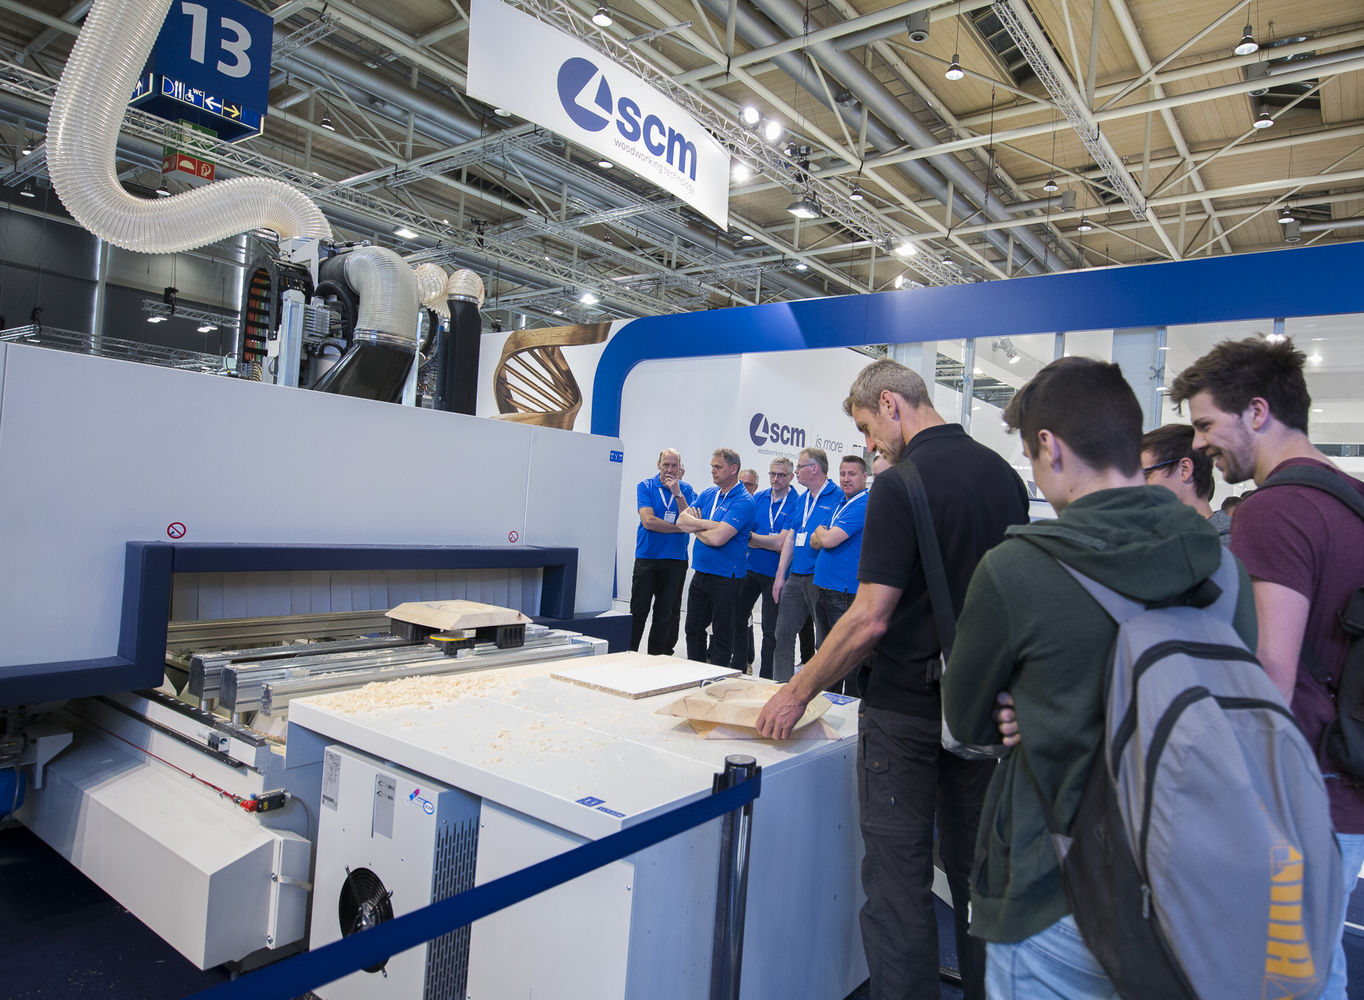 Diary from Hanover. “Lean Cell 4.0” at Ligna 2017